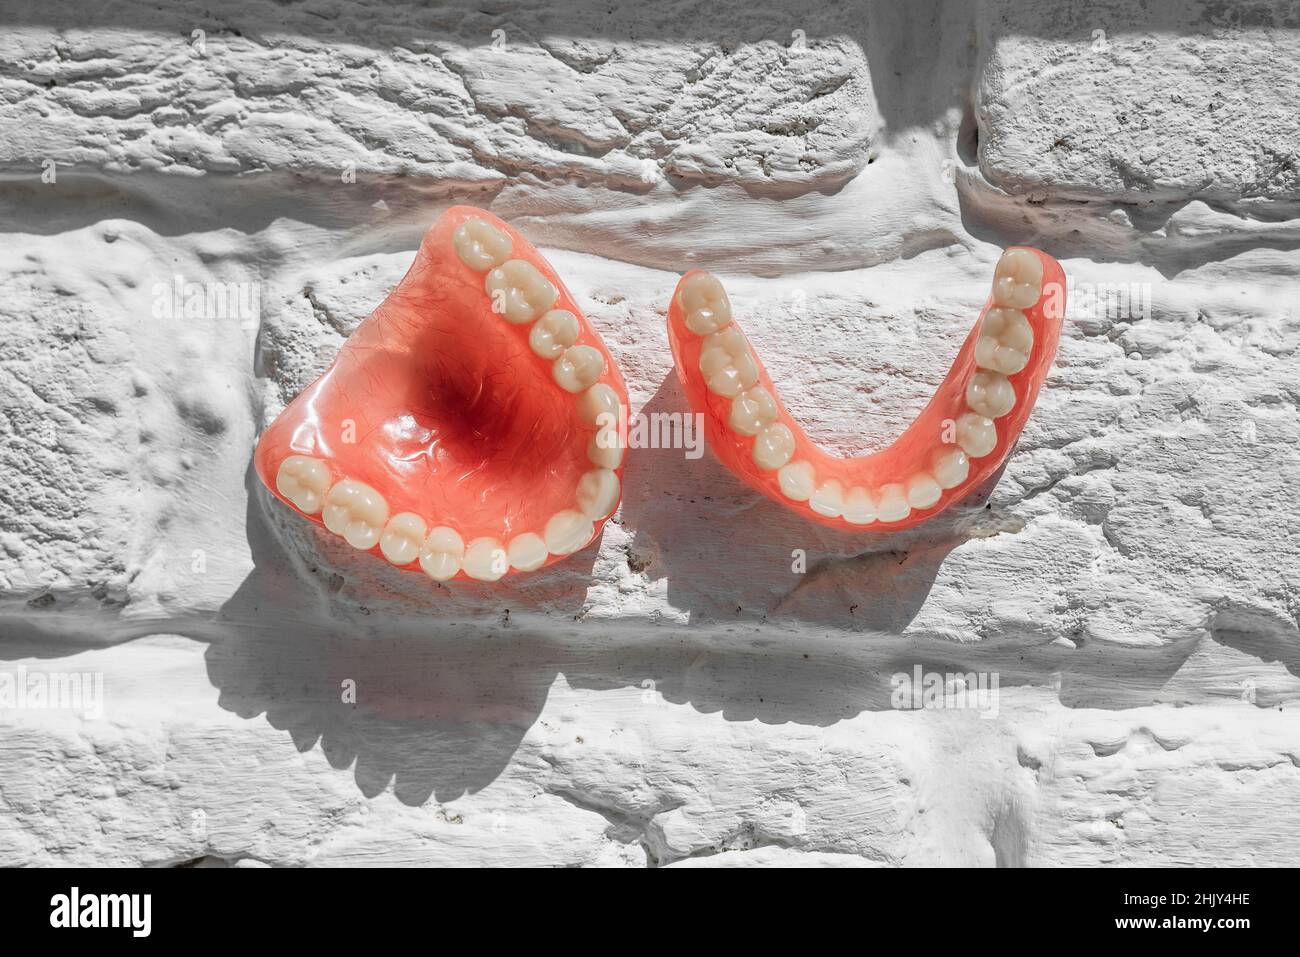 Full removable plastic denture of the jaws. A set of dentures on a light background. Two acrylic dentures. Upper and lower jaws with fake teeth. Dentu Stock Photo